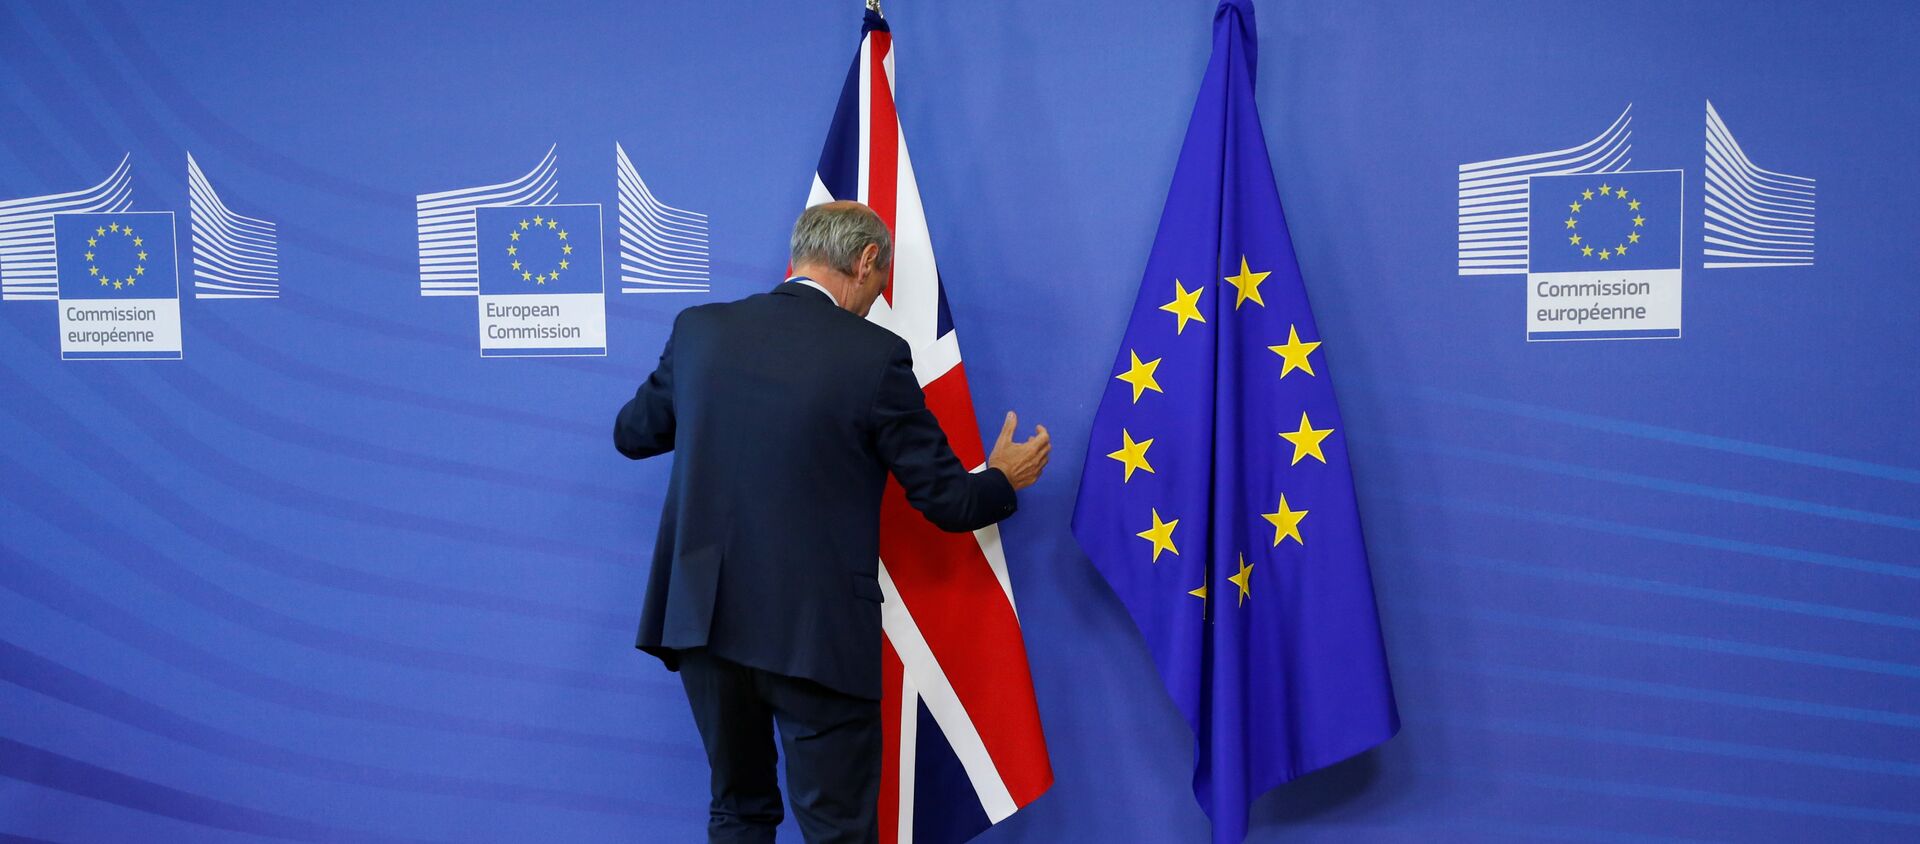 Flags are arranged at the EU headquarters as Britain and the EU launch Brexit talks in Brussels, June 19, 2017 - Sputnik International, 1920, 24.05.2020